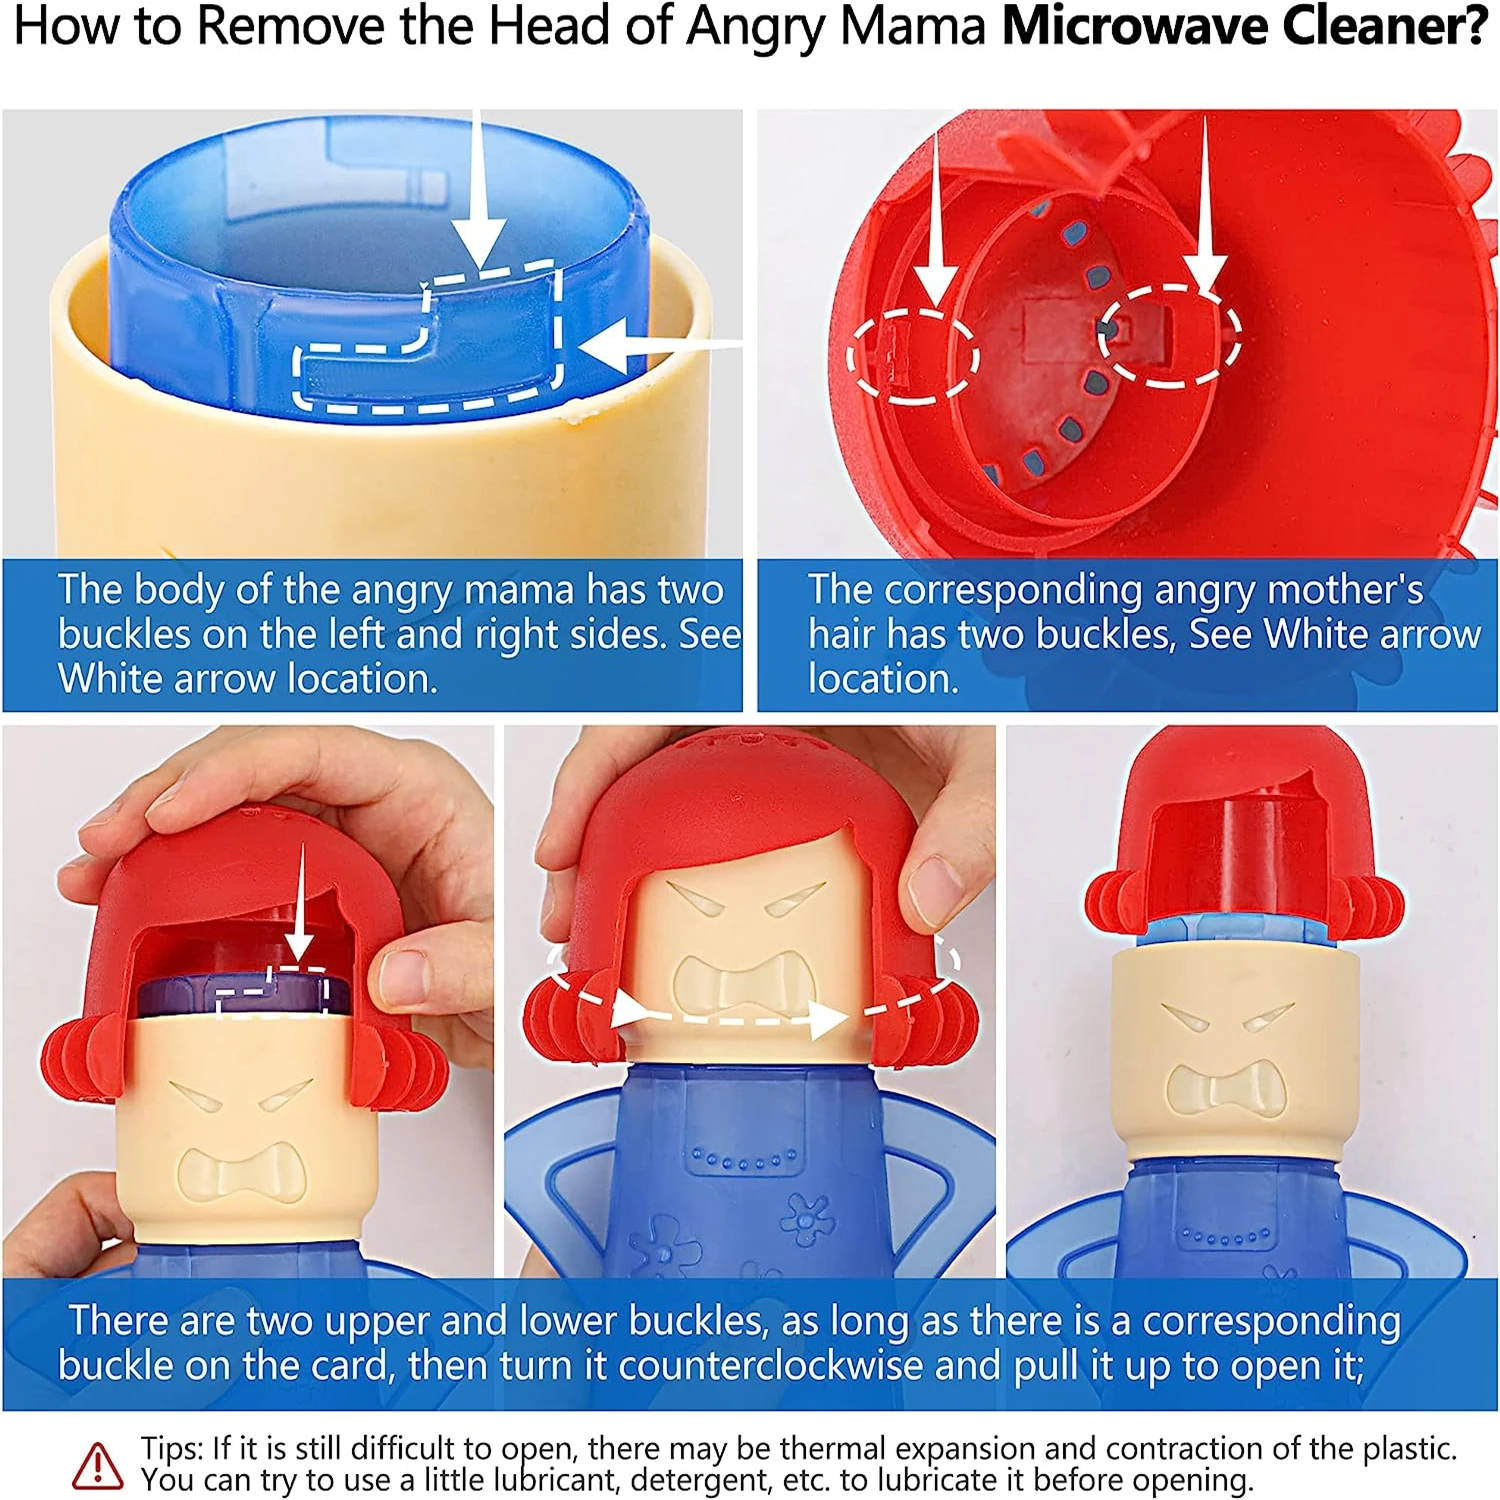 Does it work? Putting 'Angry mama' microwave cleaner to the test 